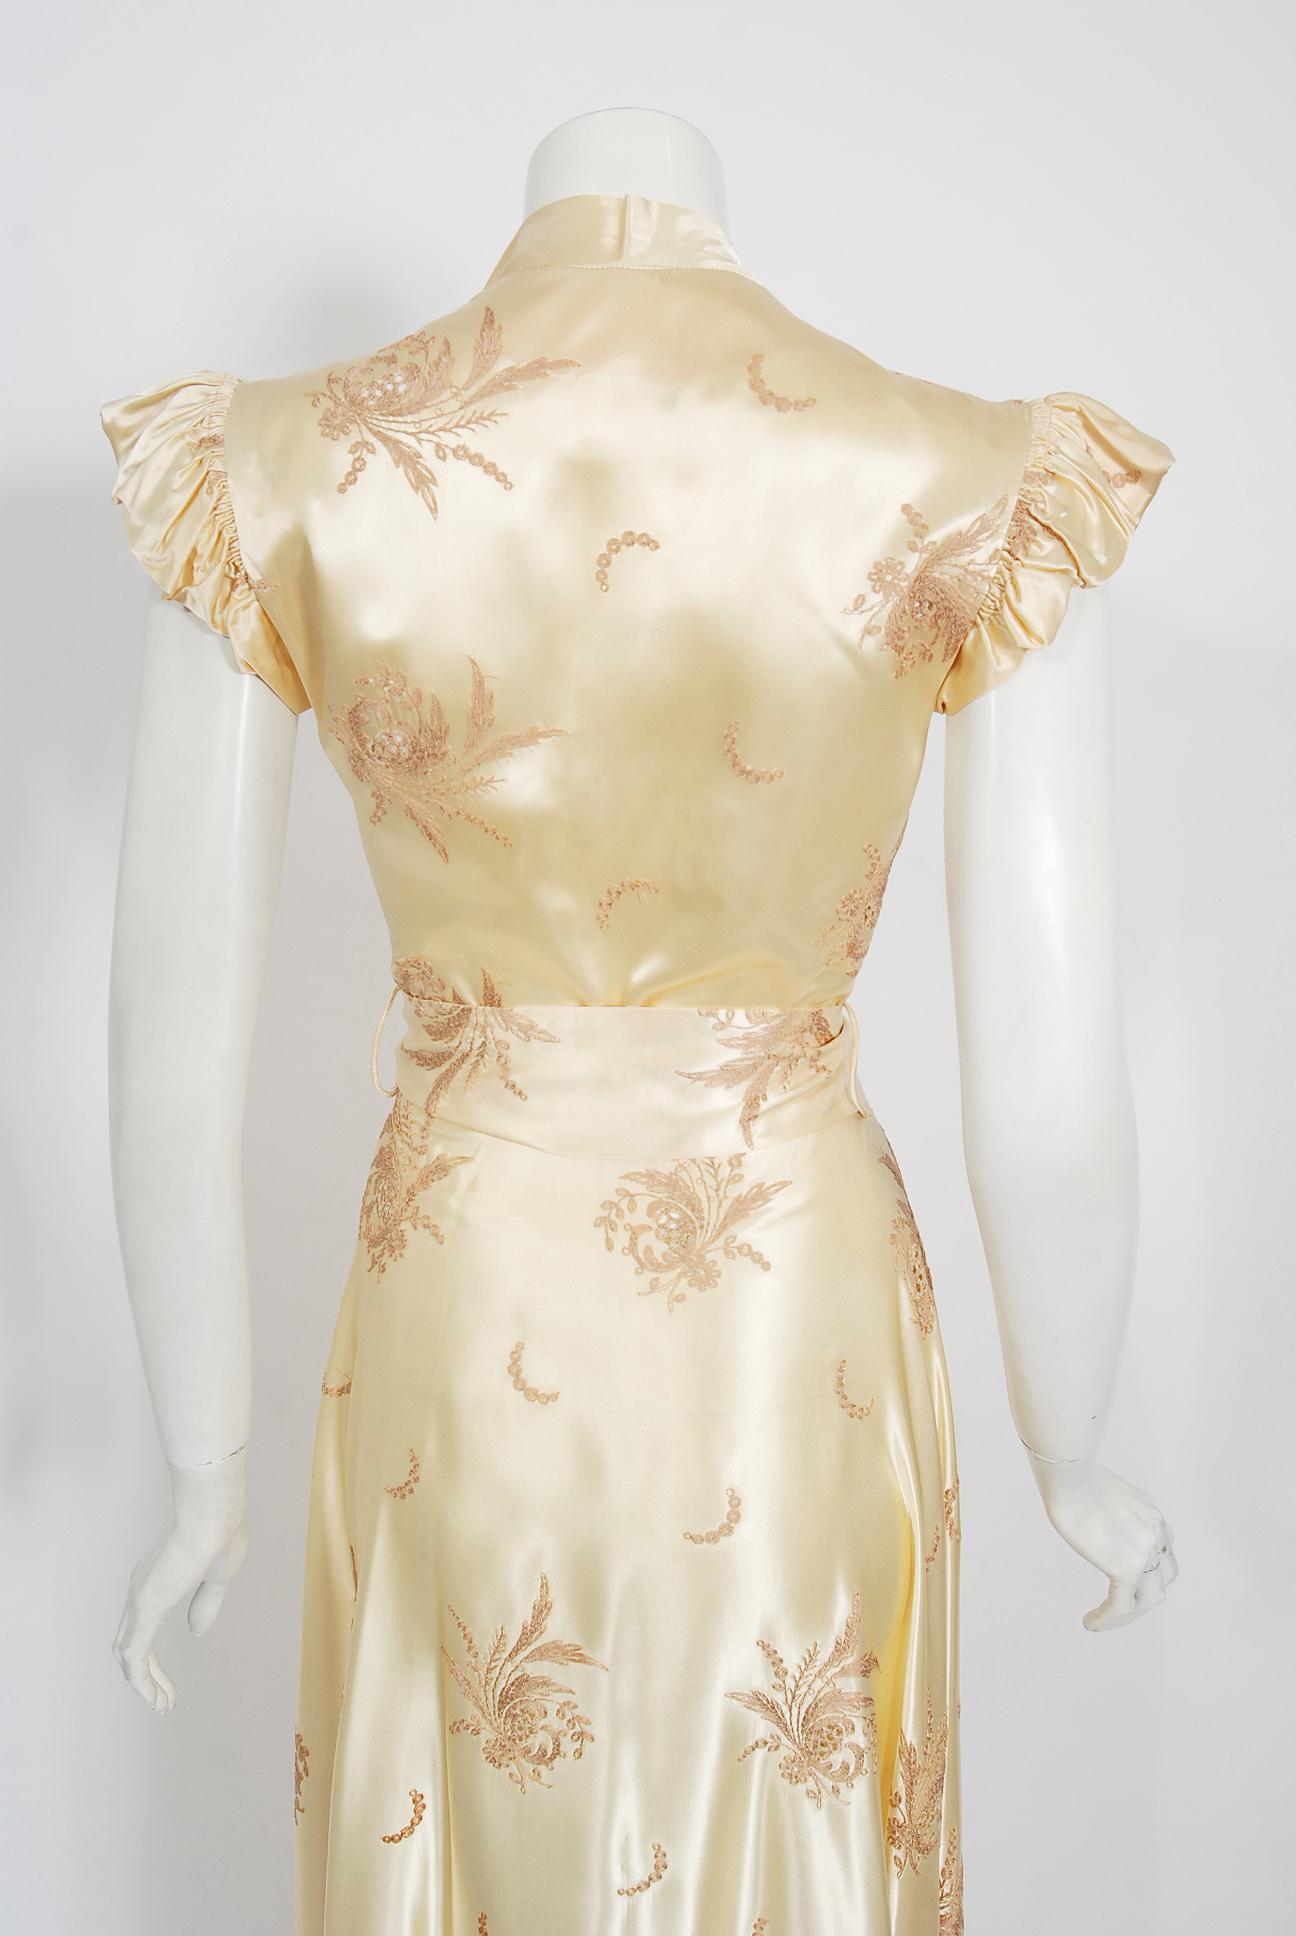 Women's Vintage 1940's Embroidered Creme Silk Satin Belted Wrap Bridal Dressing Gown